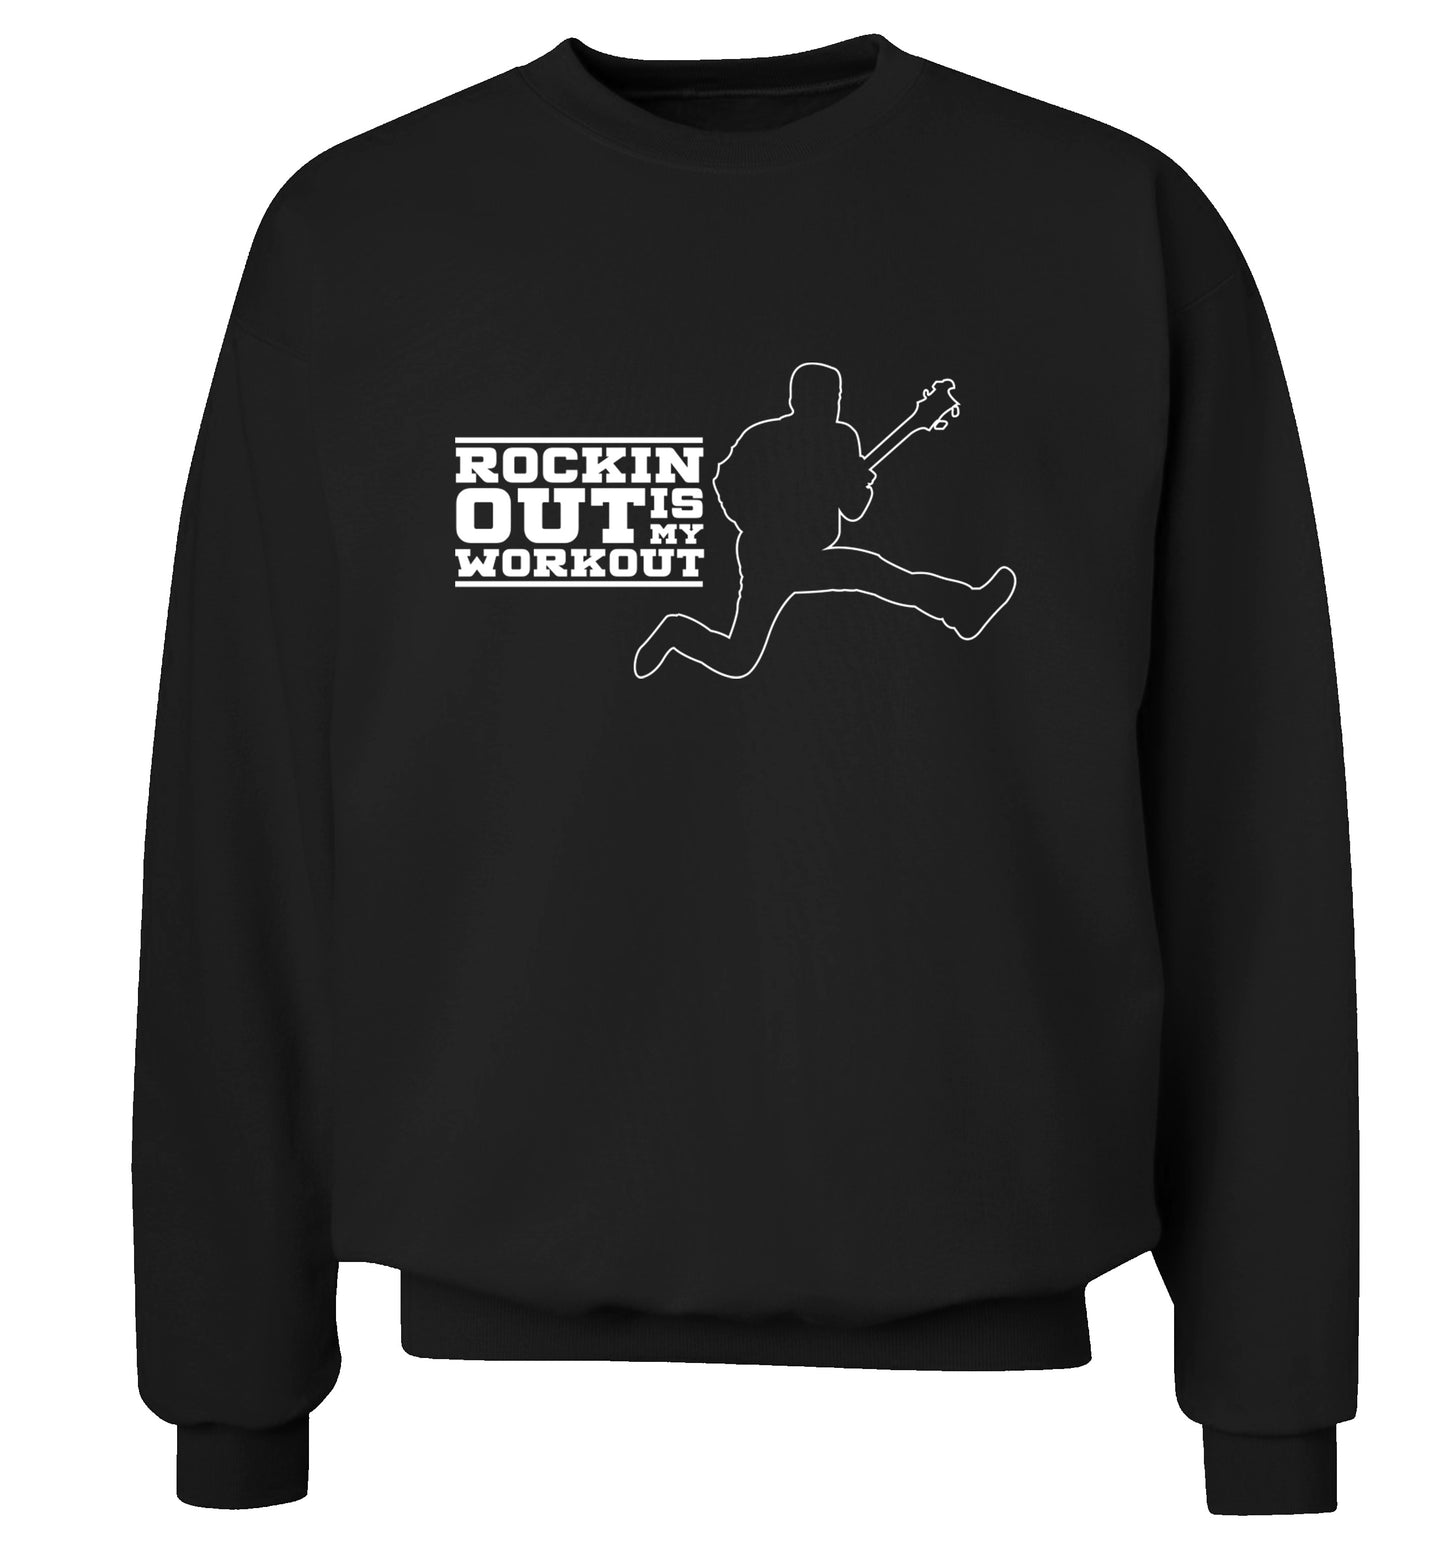 Rockin out is my workout Adult's unisex black Sweater 2XL